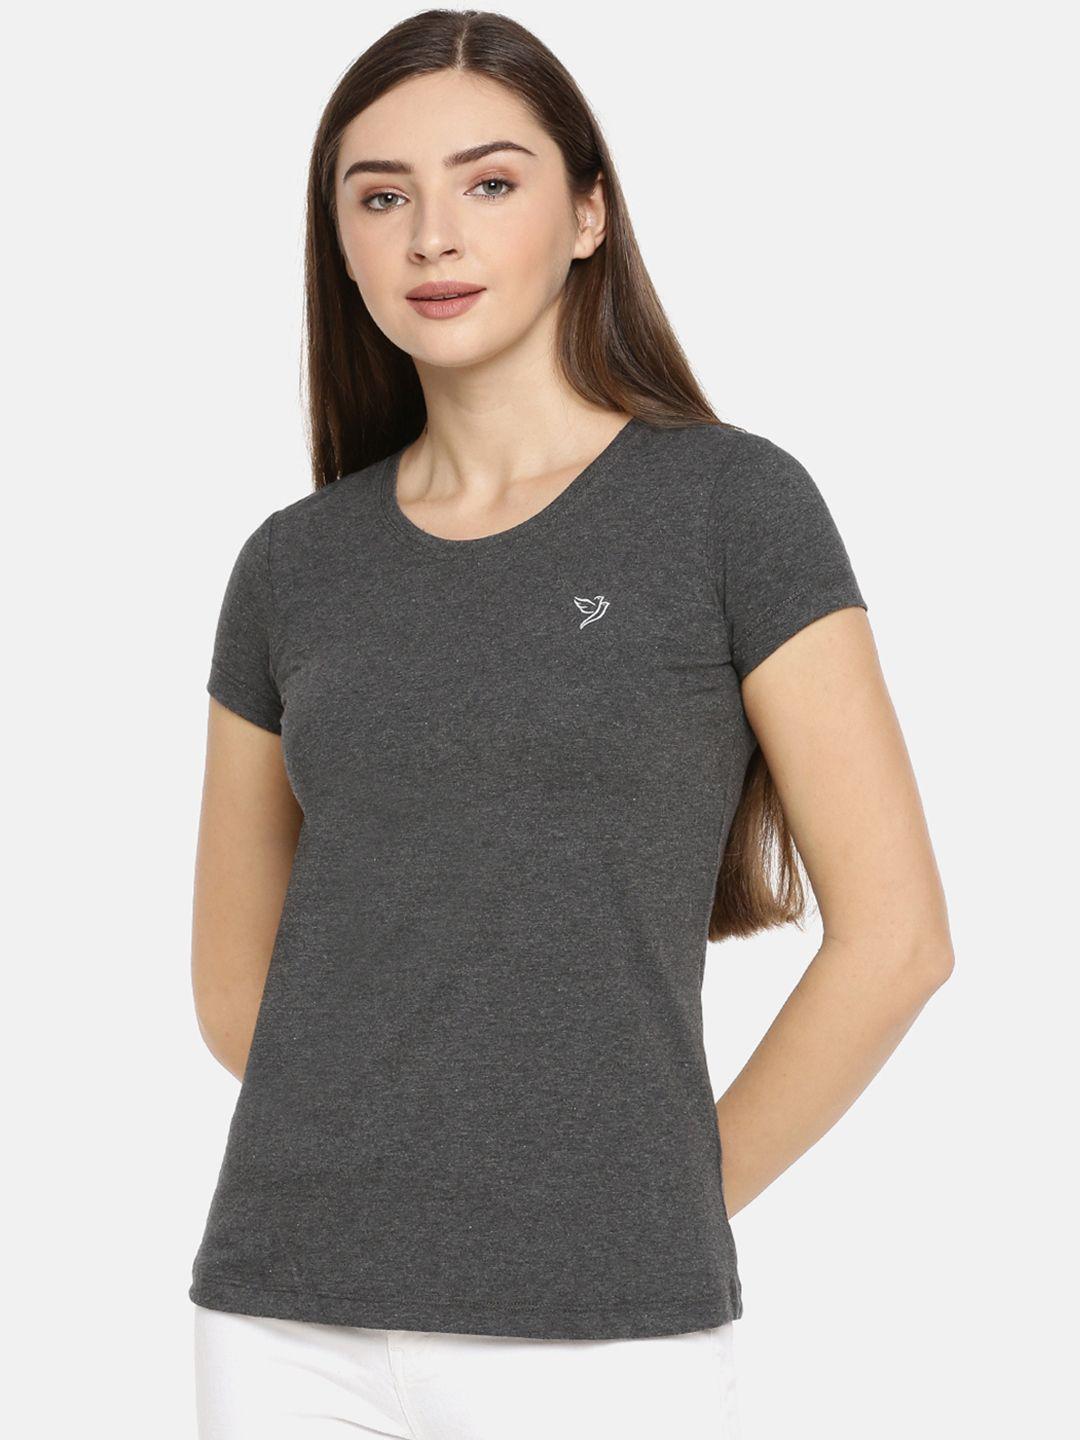 twin-birds-women-charcoal-grey-slim-fit-solid-round-neck-t-shirt